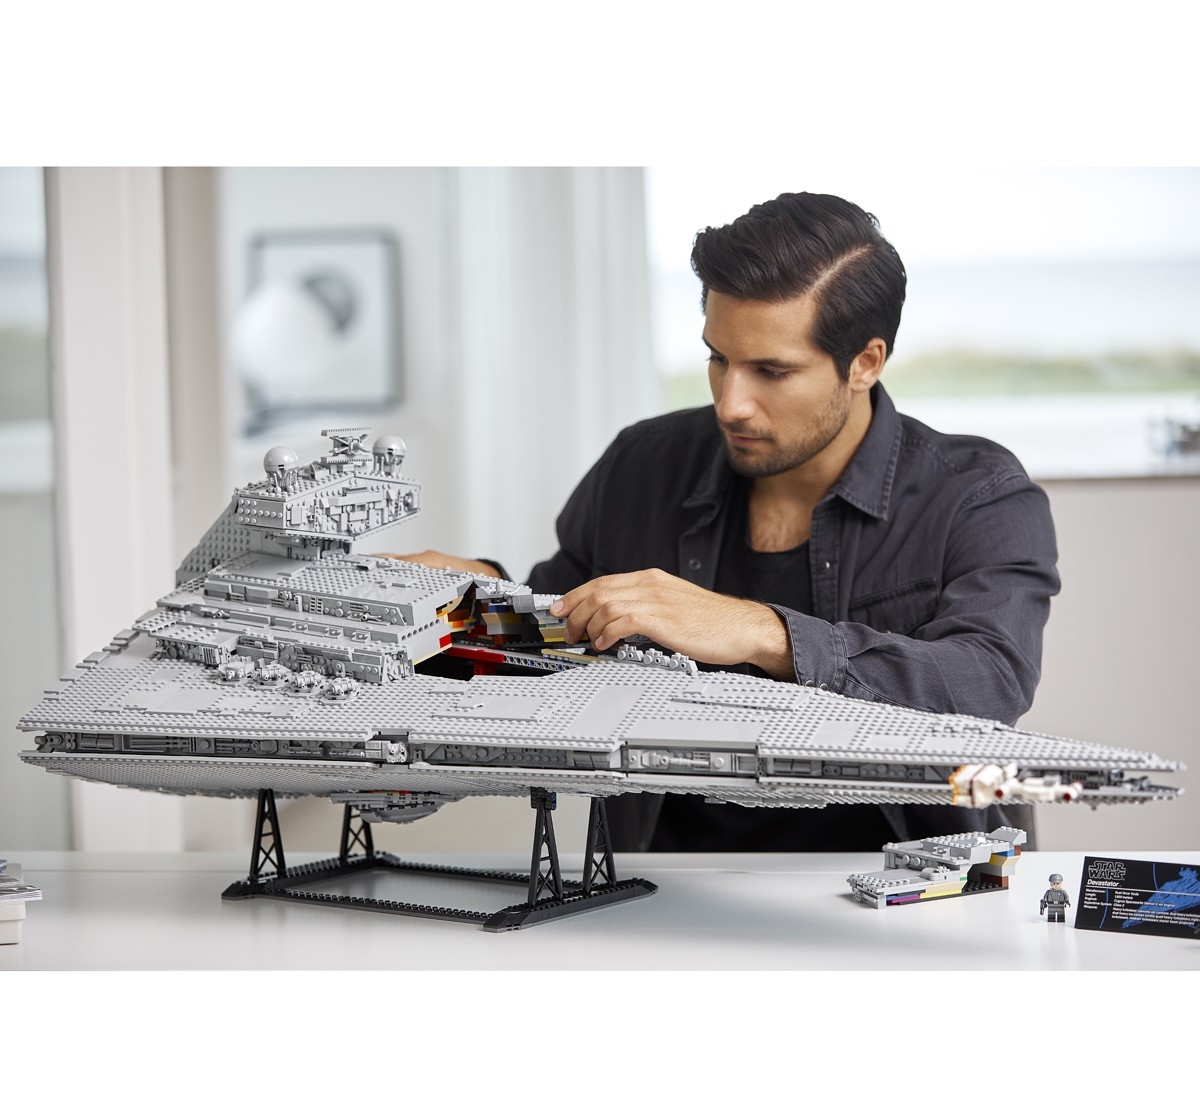  LEGO Star Wars: A New Hope Imperial Star Destroyer 75252  Building Kit (4,784 Pieces) : Toys & Games